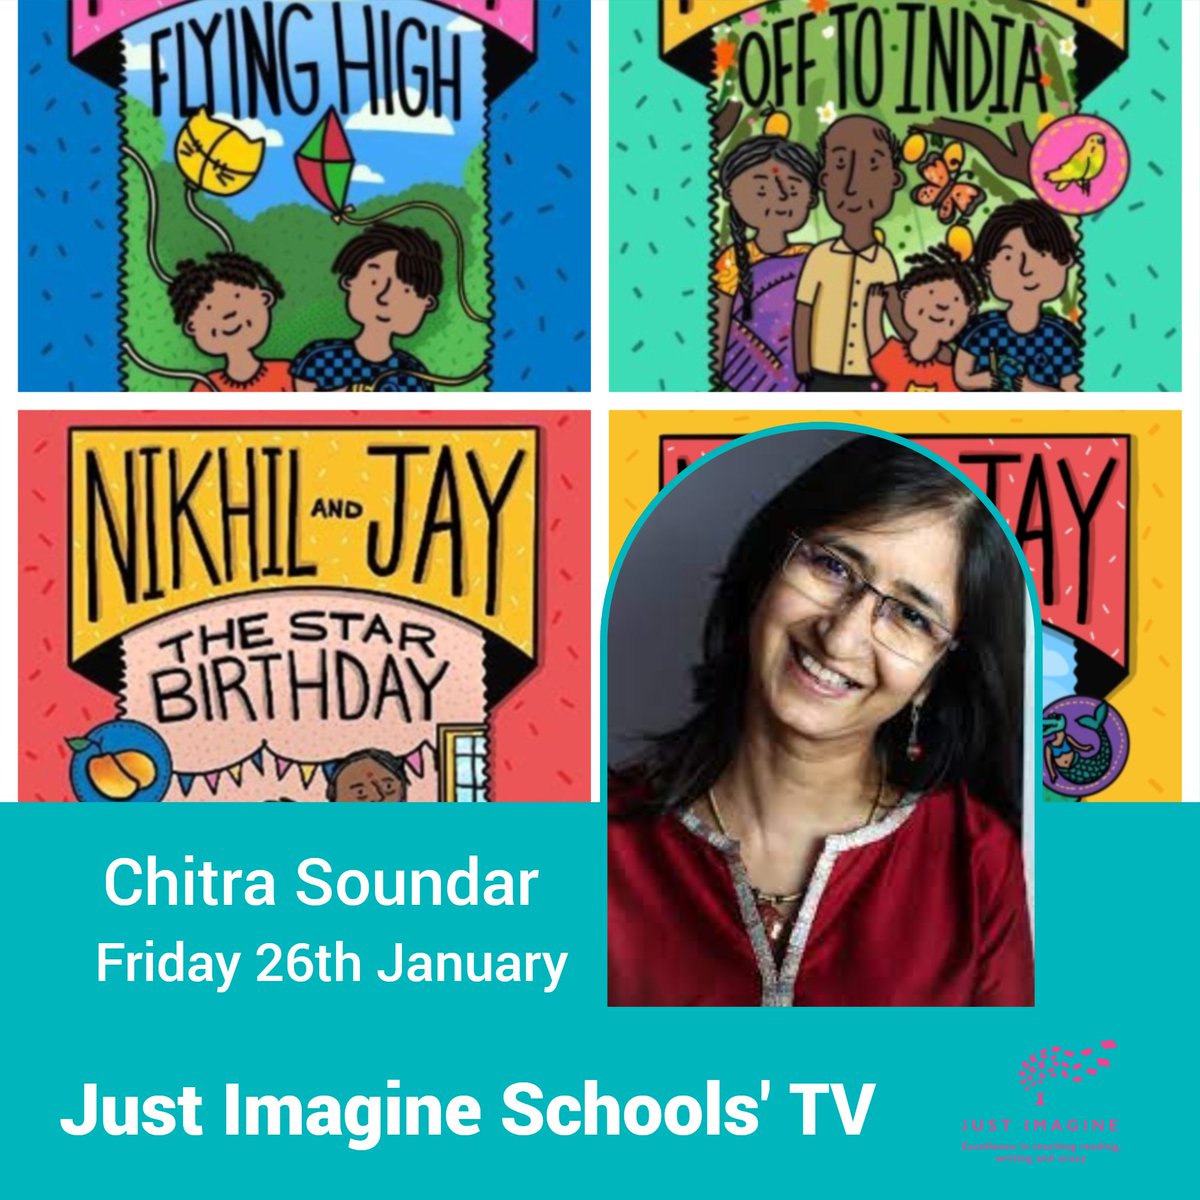 Friday 26th January 1.45 Virtual author visit with the fabulous @csoundar Just Imagine member schools £30 Other schools £50. Includes two sets of Nikhil and Jay series with signed bookplates. Plus, teaching guide. To register your interest, email assistant@justimagine.co.uk